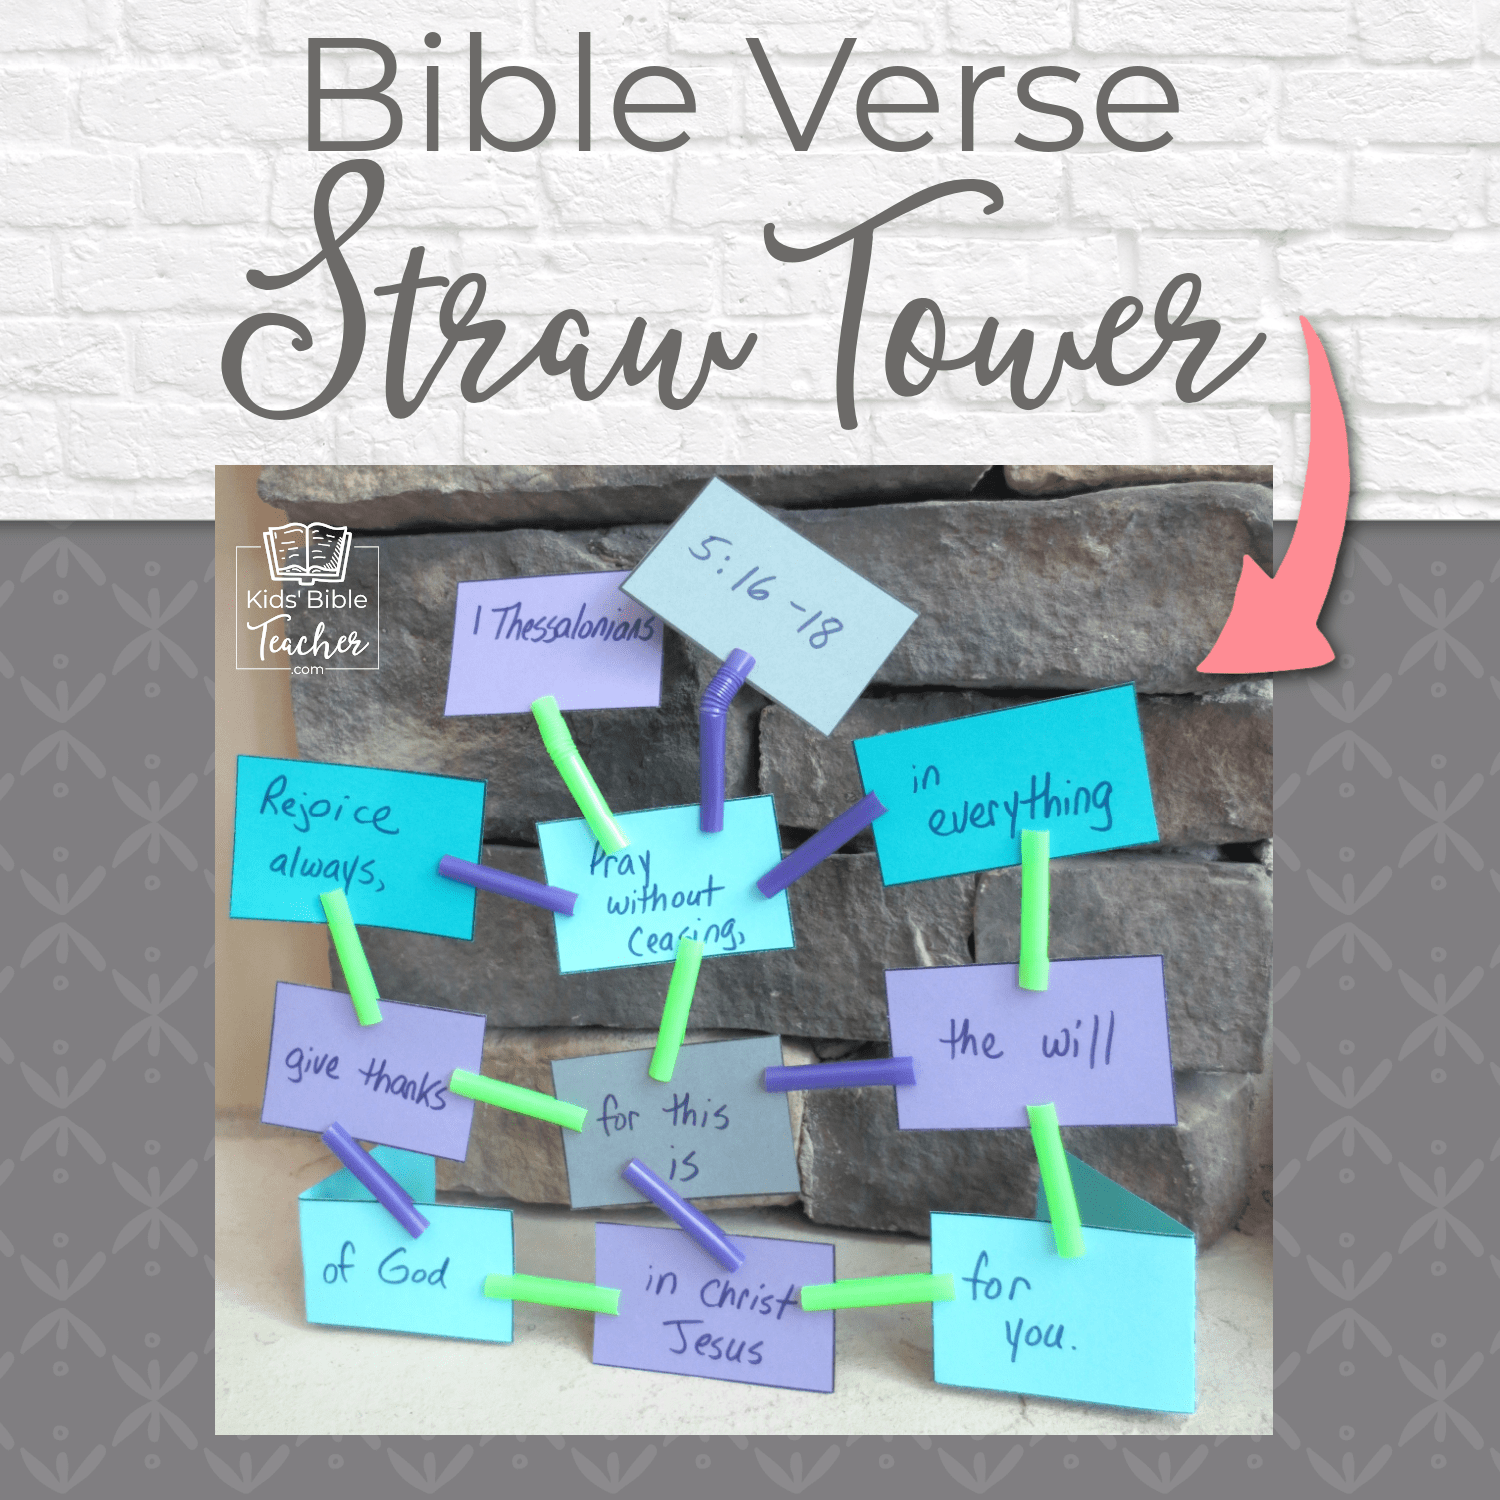 This Bible Verse Tower Challenge is a super fun way to encourage kids to memorize a Bible verse. It could be used as a craft or game. Printable included.